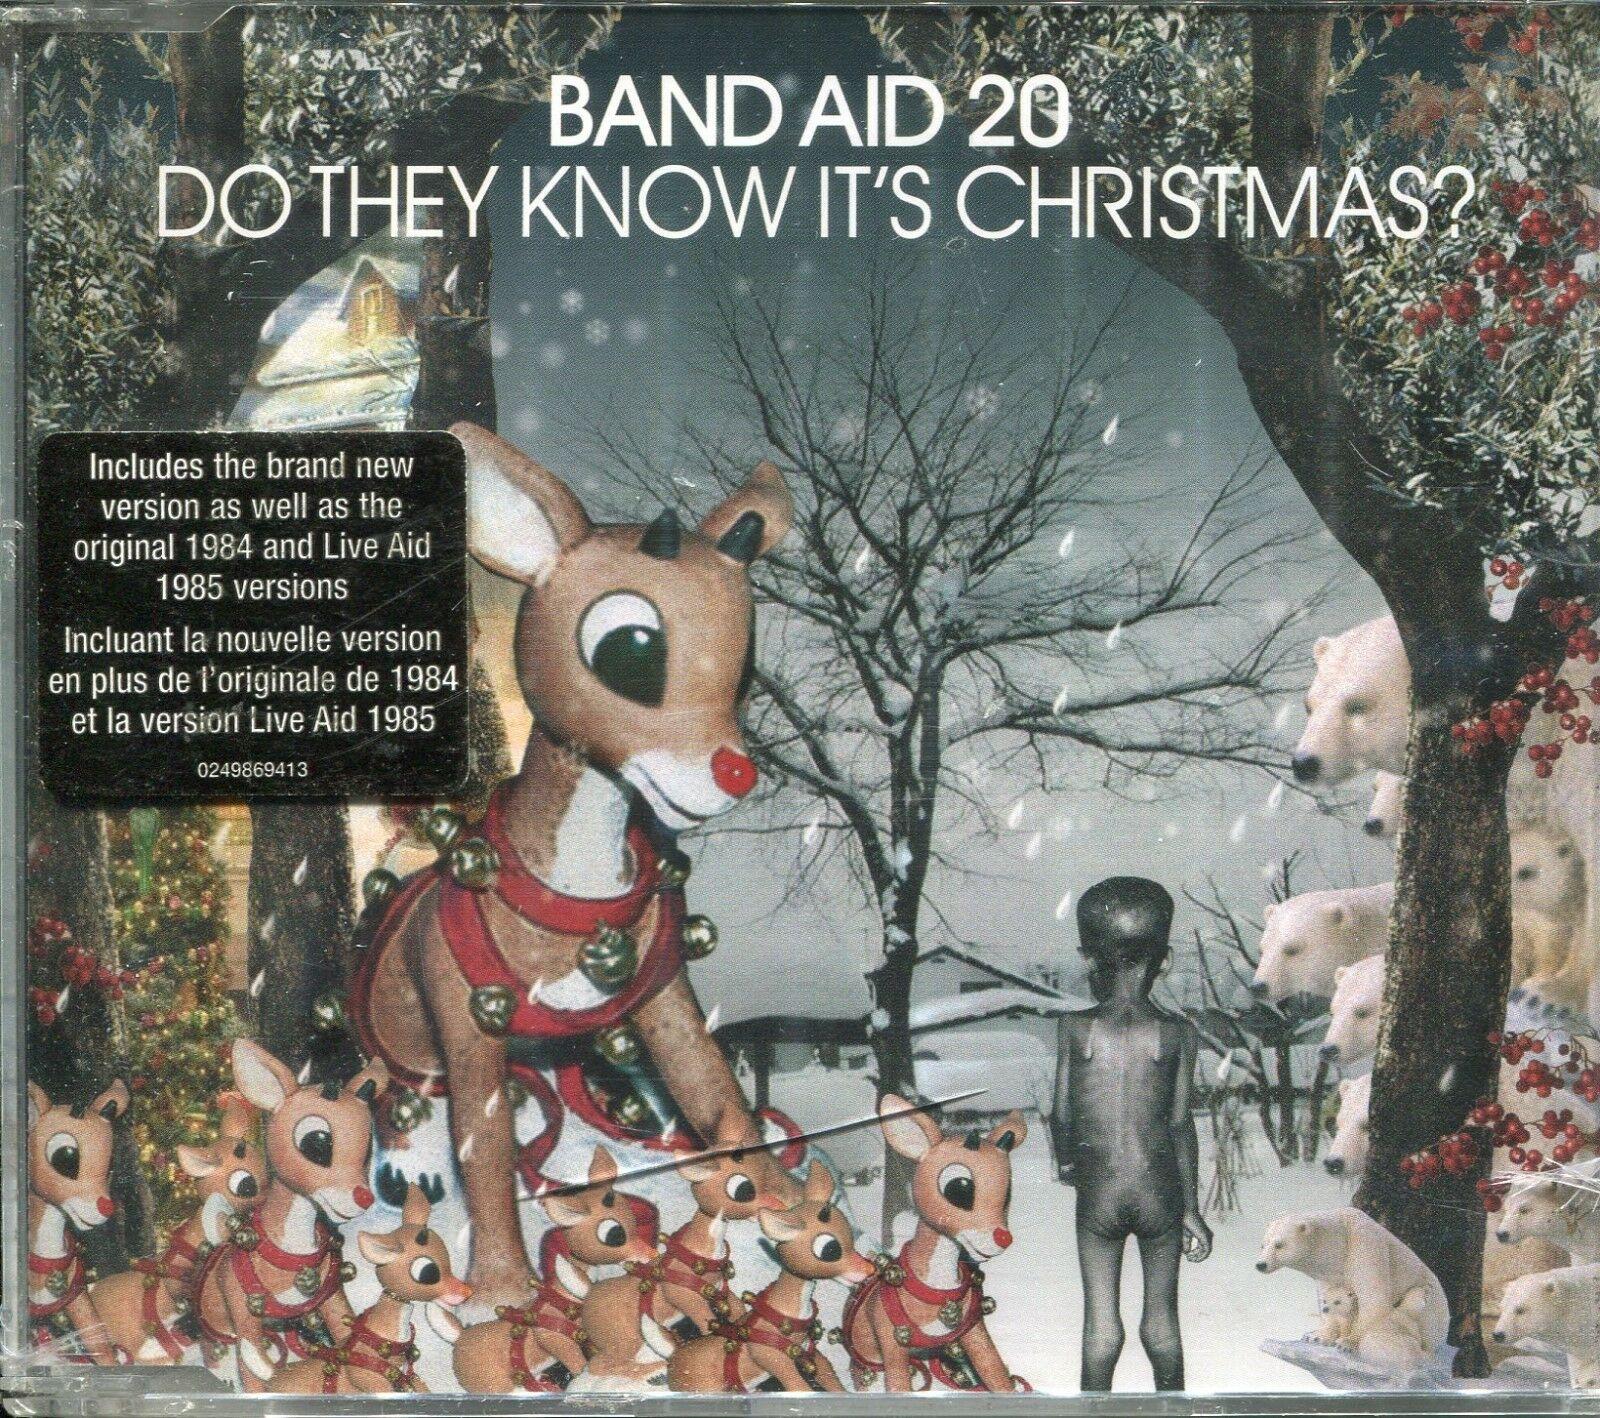 Do They Know It's Christmas? [Single] [Single] by Band Aid 20 (CD, Nov- Universal)